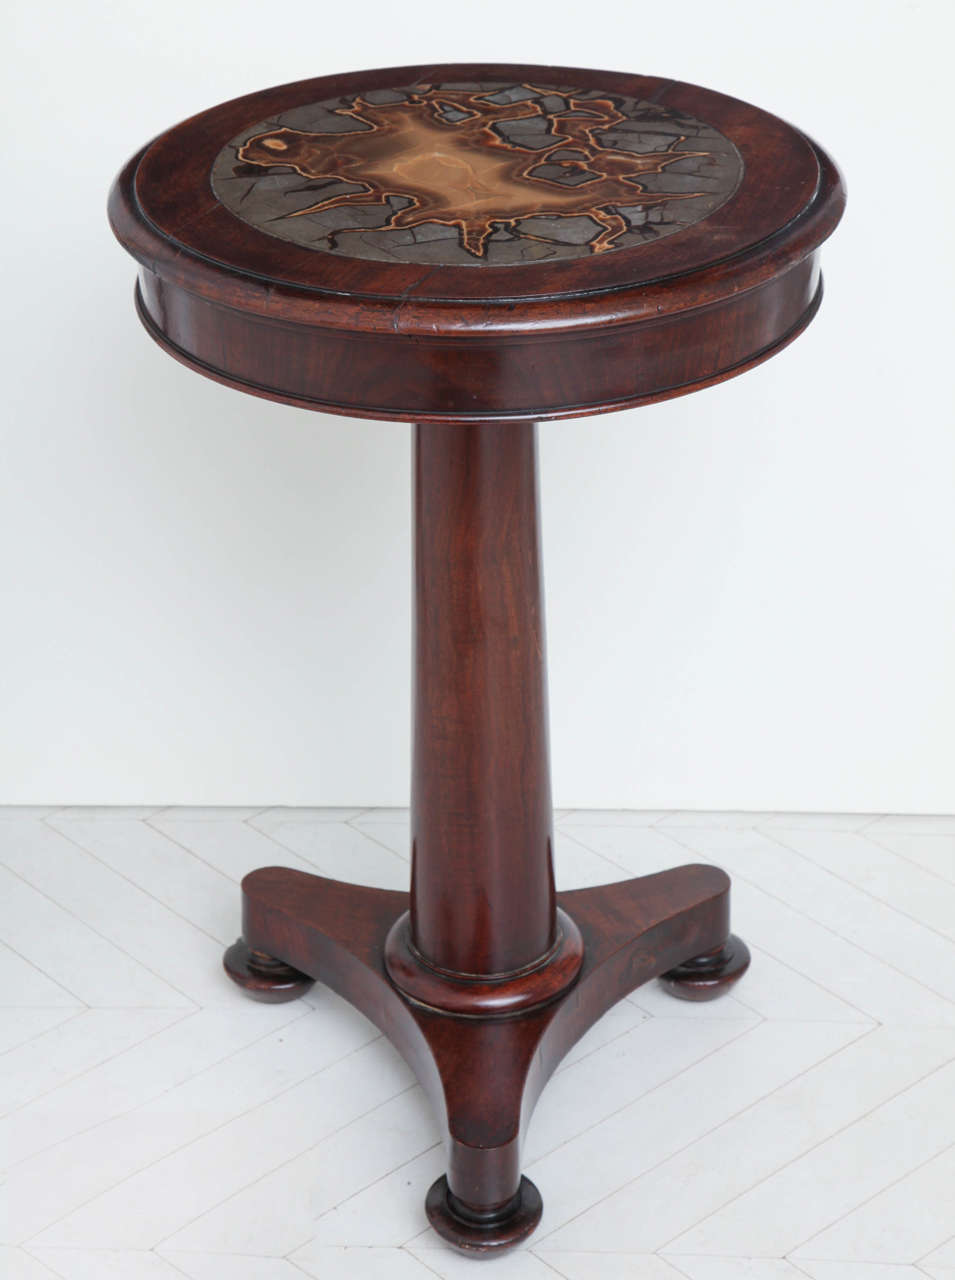 An unusual late Regency (Wiliam IV) mahogany side table with inset septarian concretion top, circa 1830